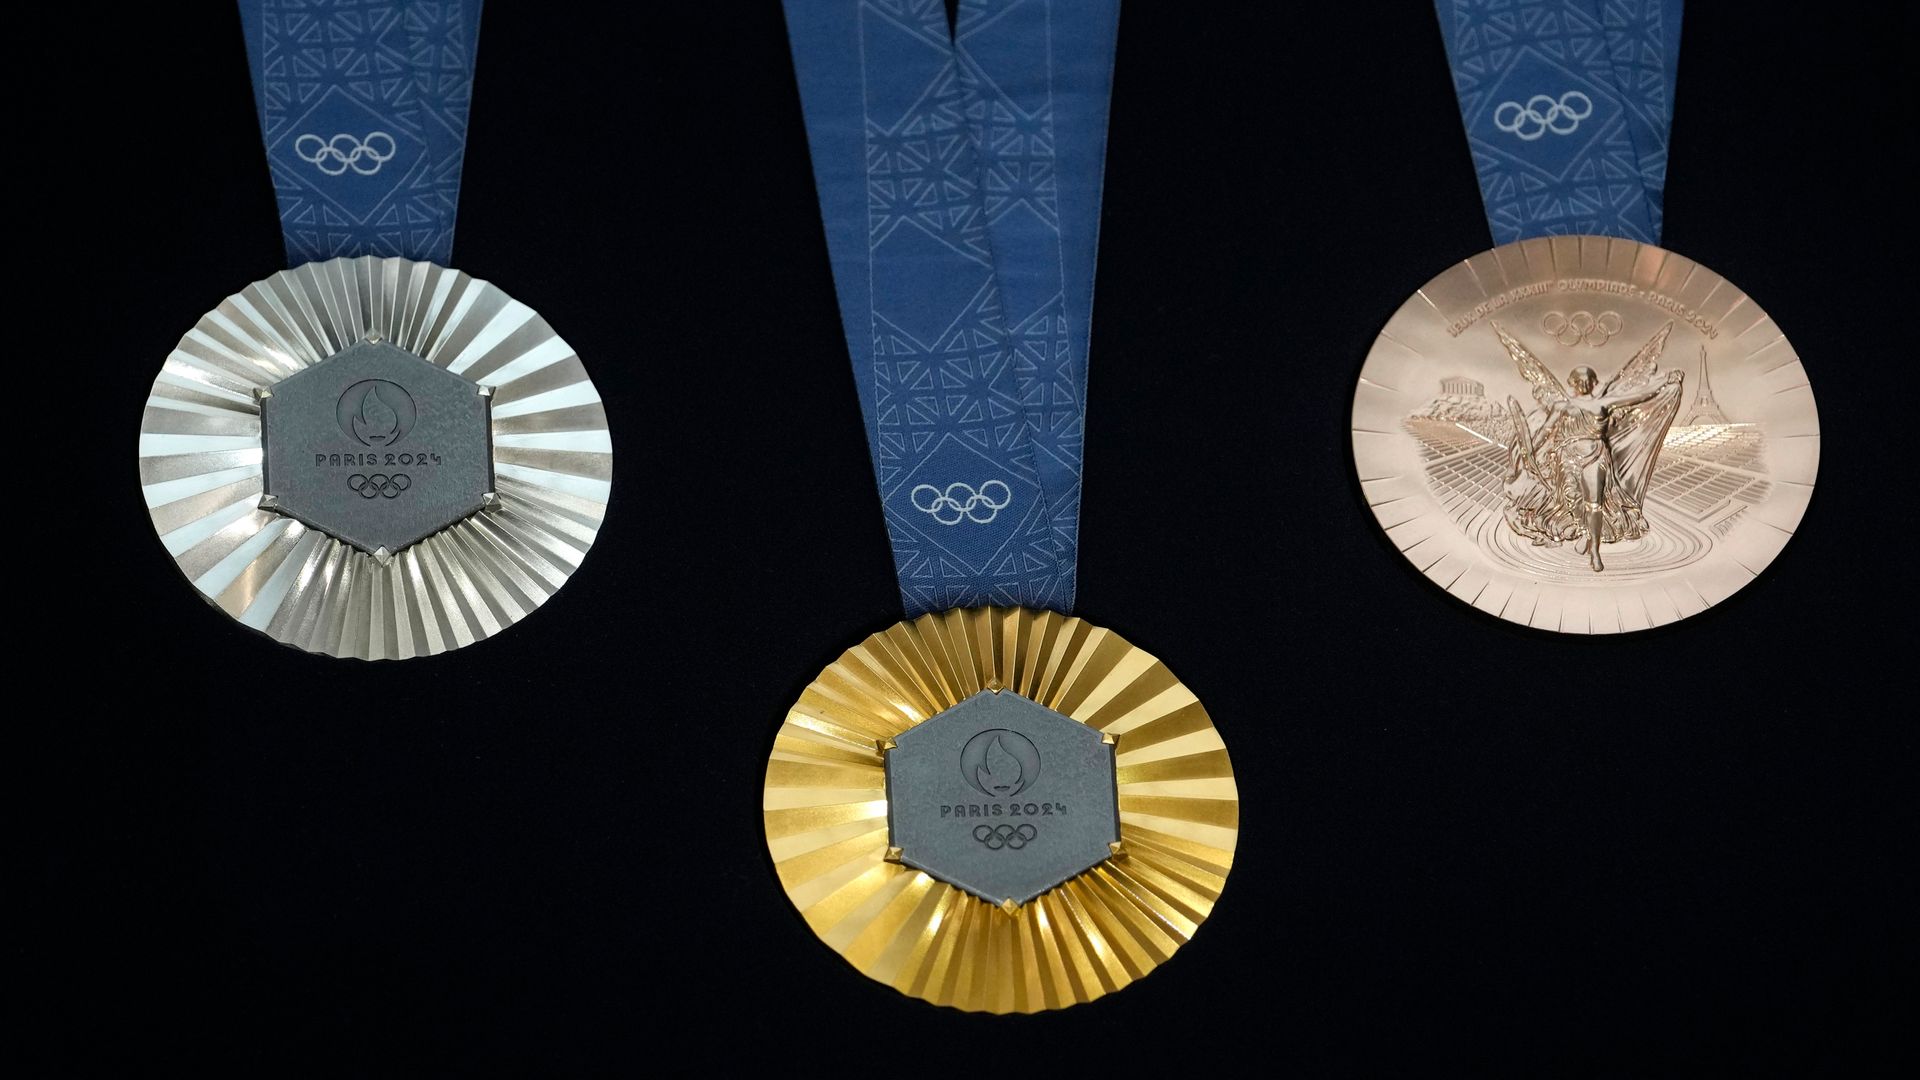 Olympic medals revealed - made with iron from the Eiffel Tower